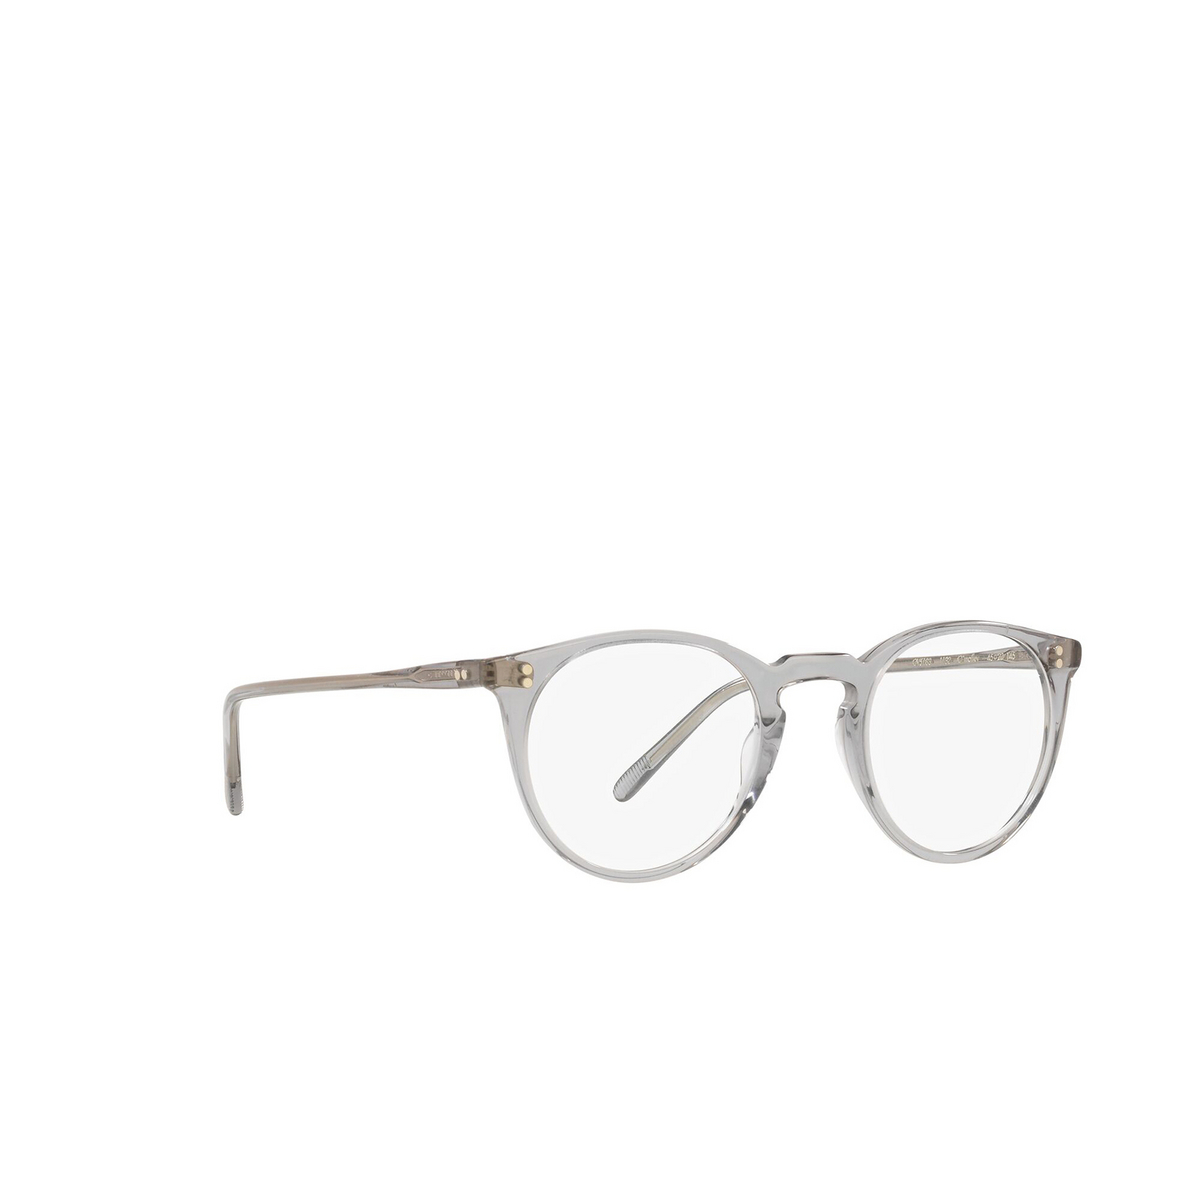 Oliver Peoples O'MALLEY Eyeglasses 1132 Workman Grey - three-quarters view